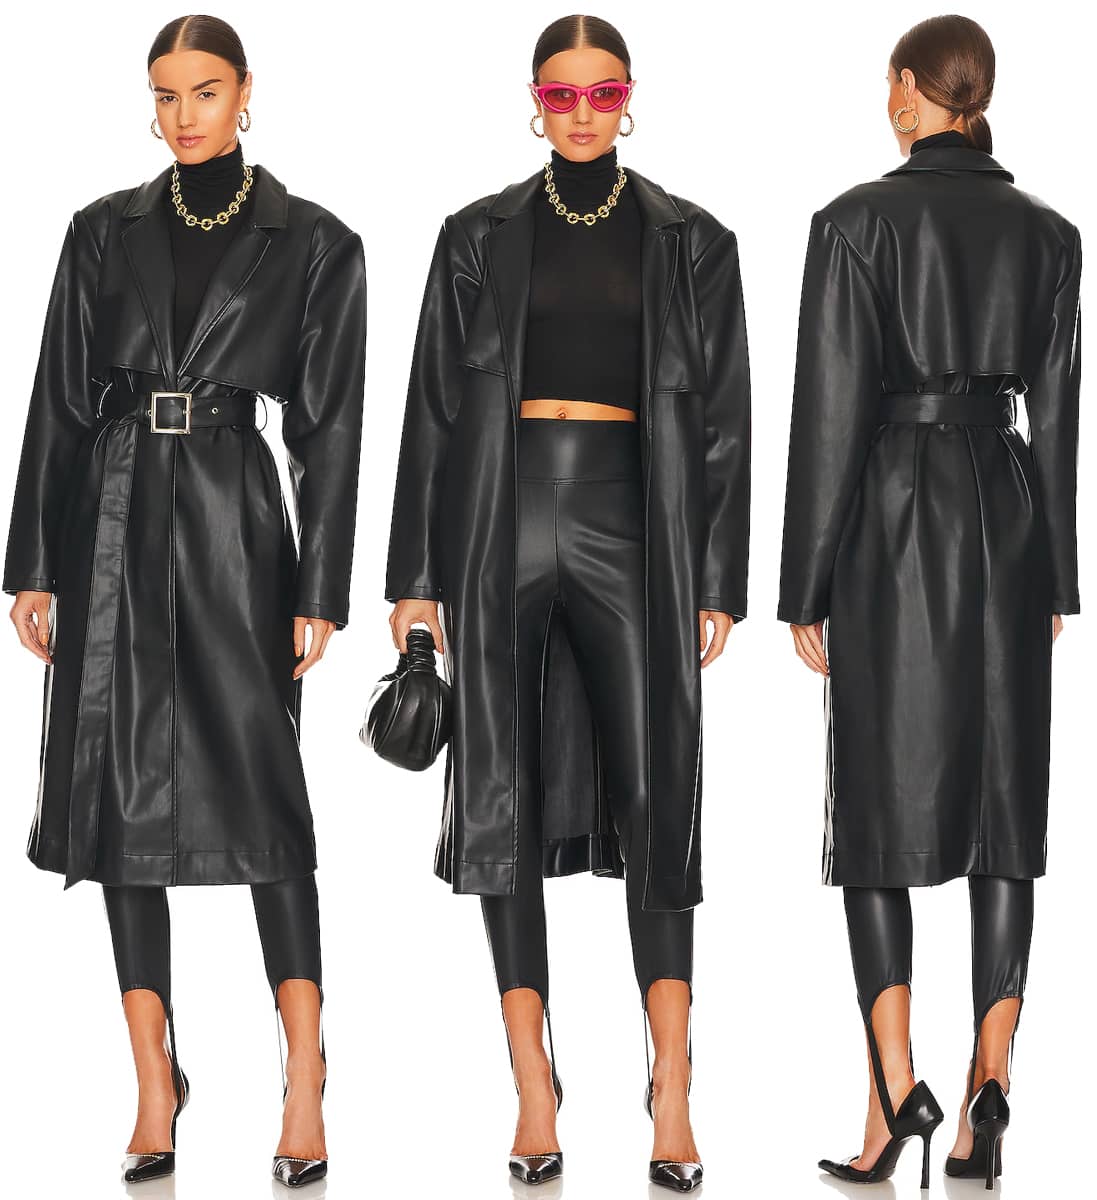 WeWoreWhat's faux leather trench coat has a front button closure, side slip pockets, and a detachable wide waist belt that gives it a contemporary streetwear vibe